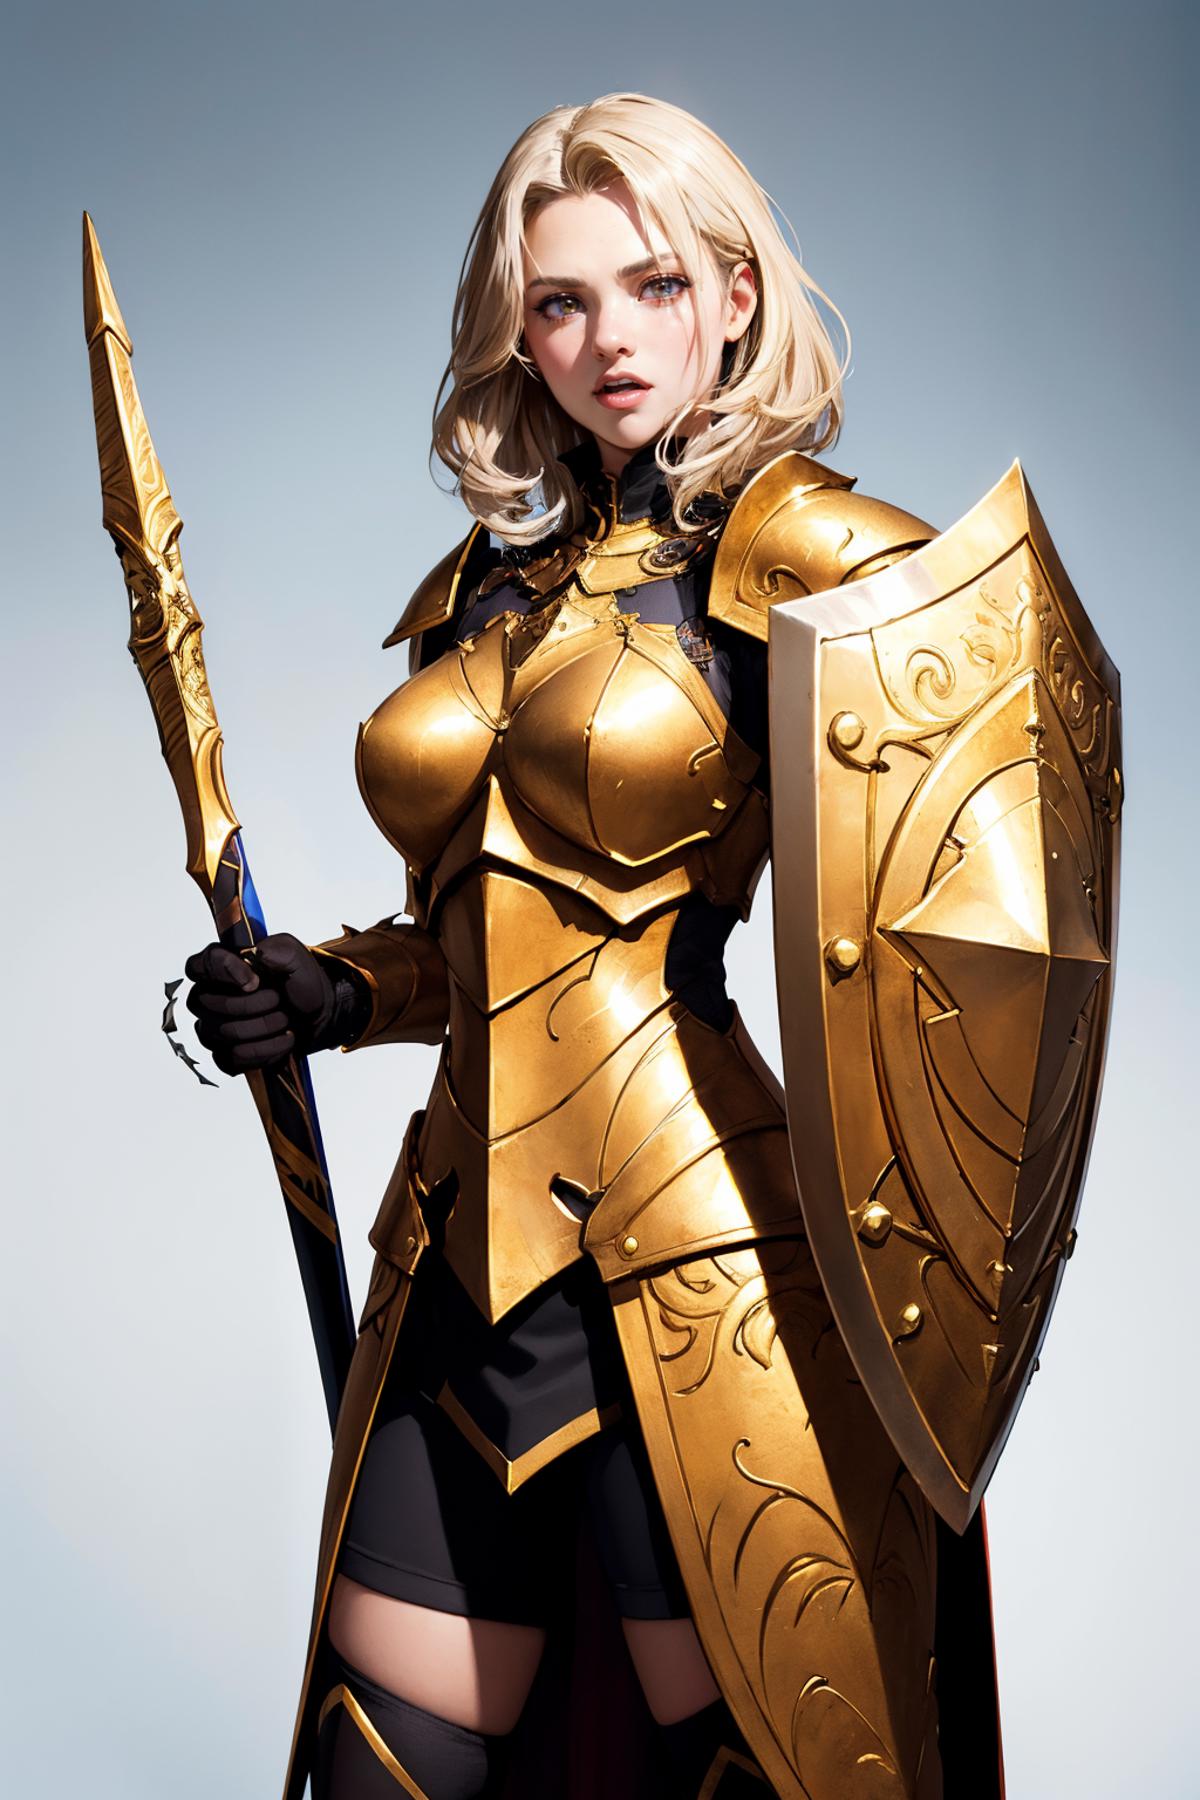 A woman in a golden armor holding a sword.